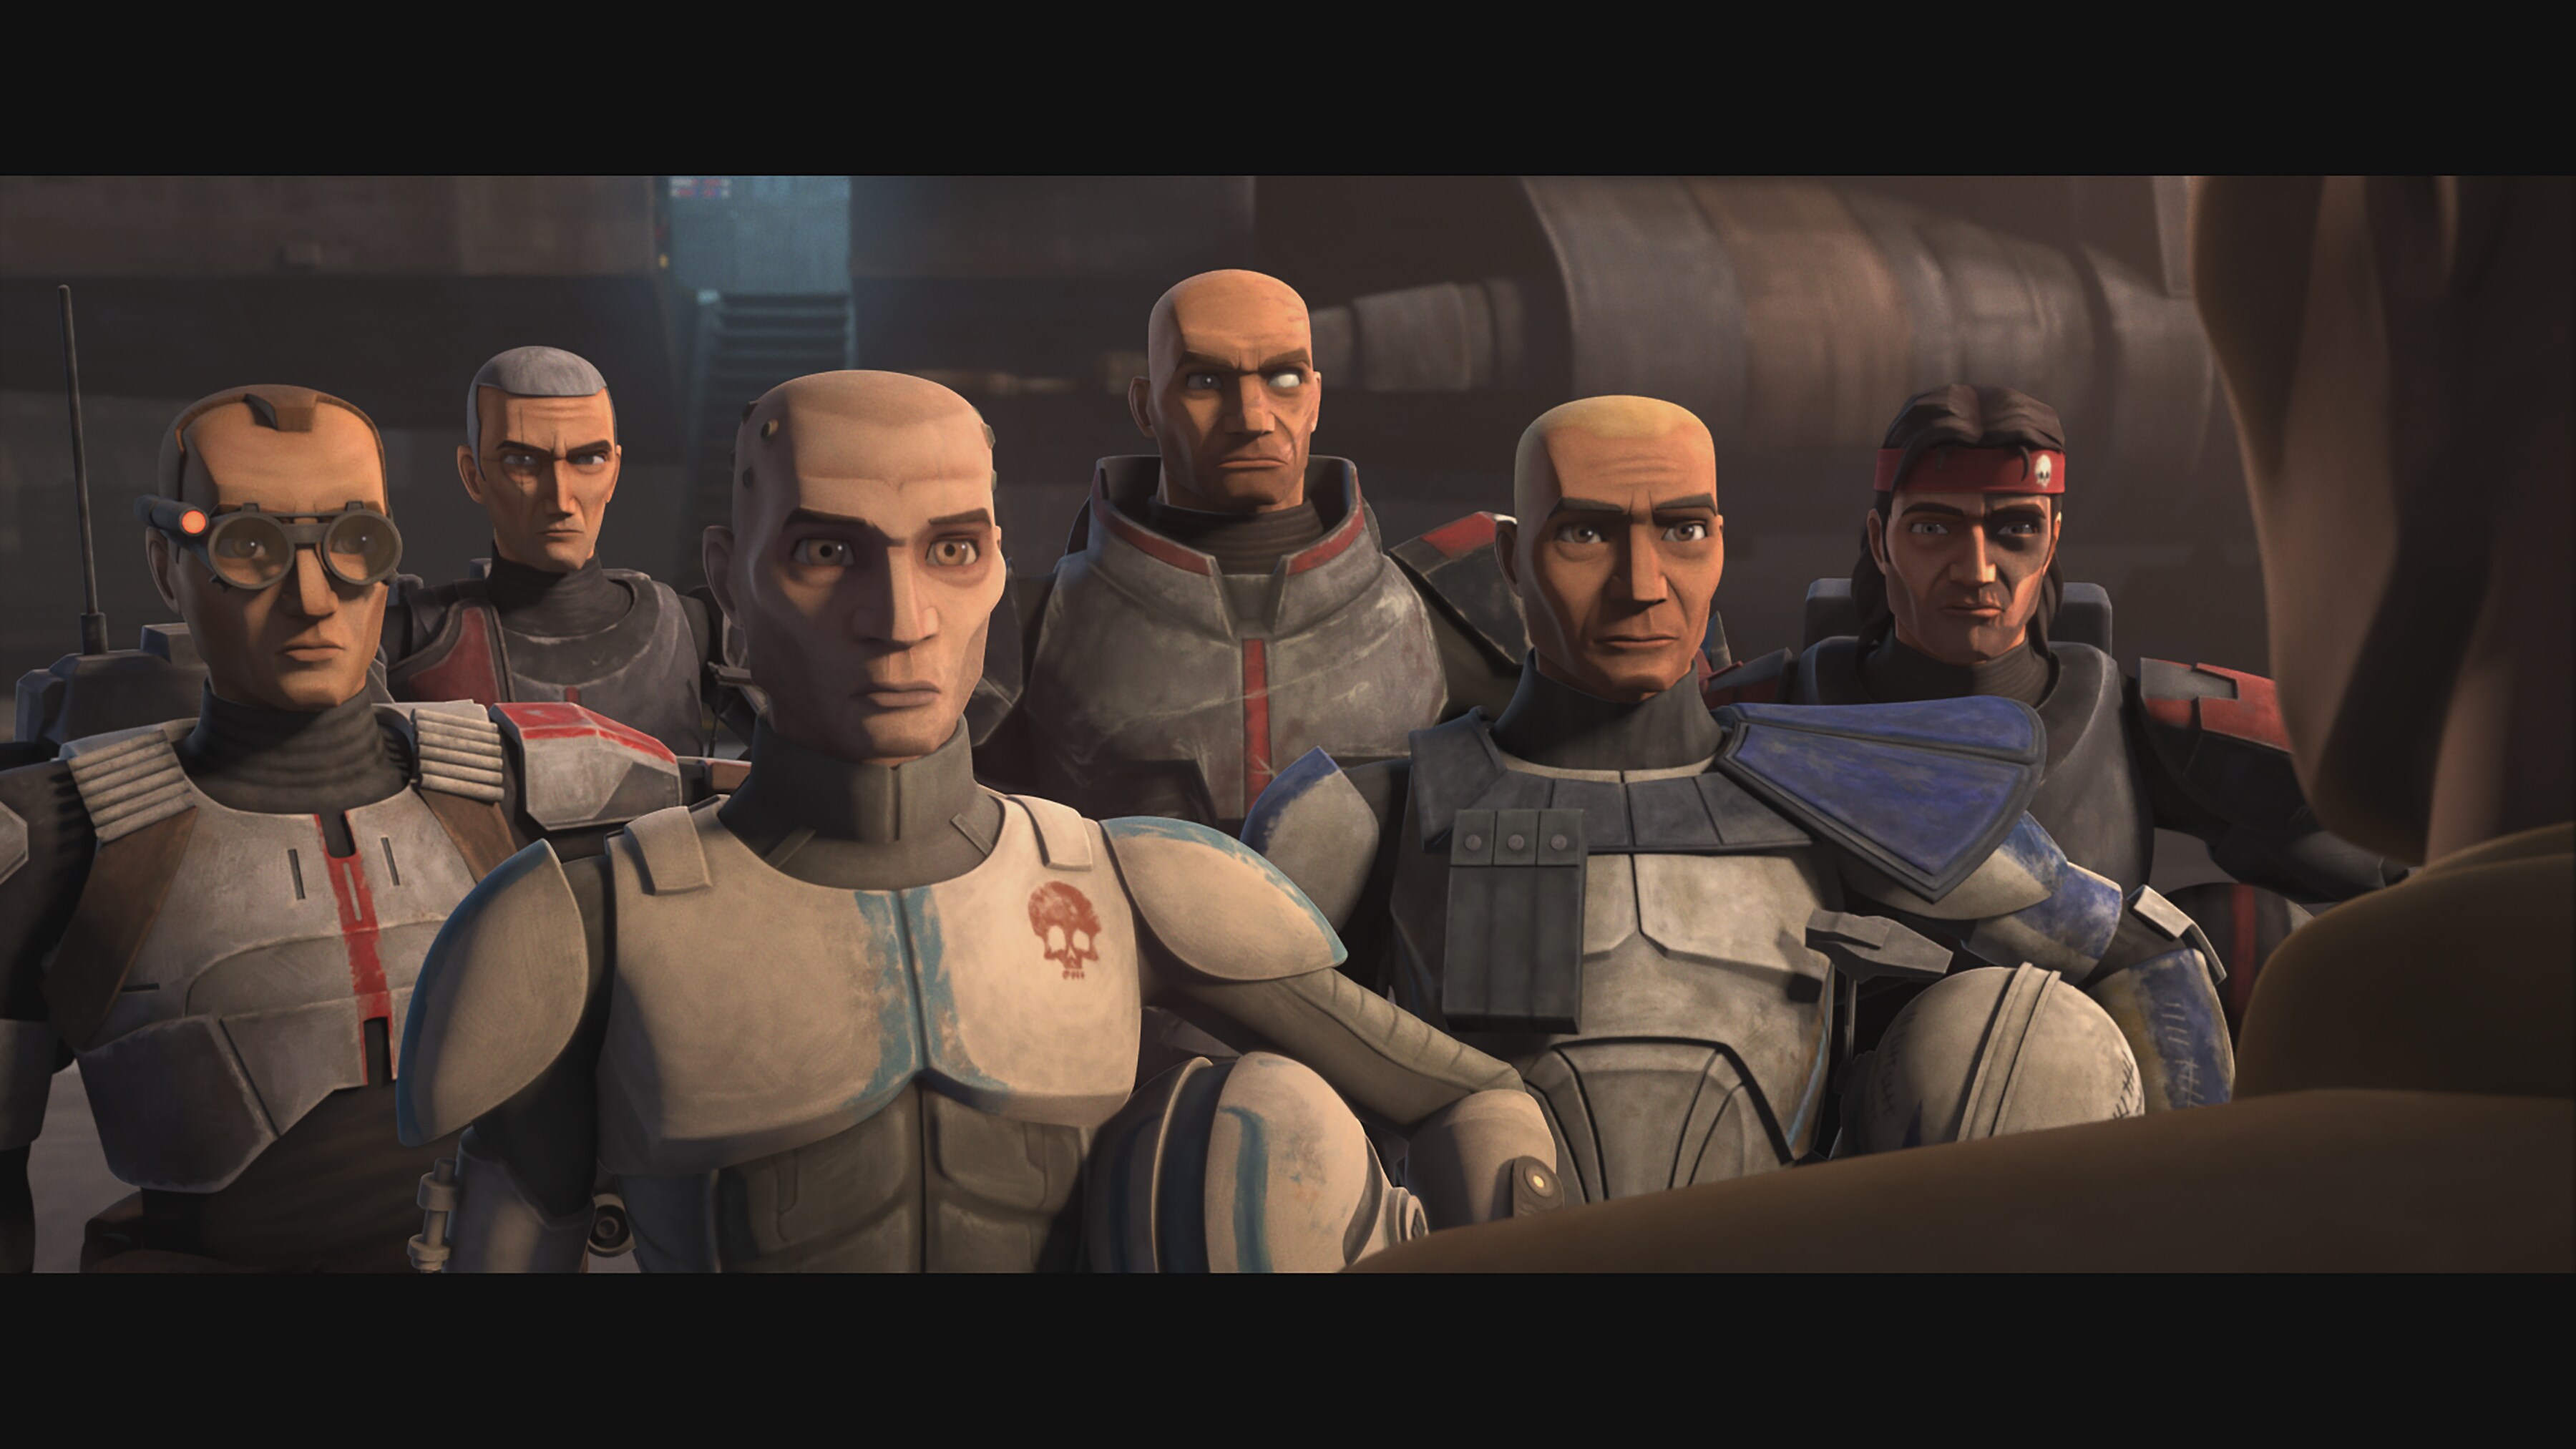 Jedi Mace Windu joins the Bad Batch and Captain Rex in an attack against separatist forces in STAR WARS: THE CLONE WARS, exclusively on Disney+.